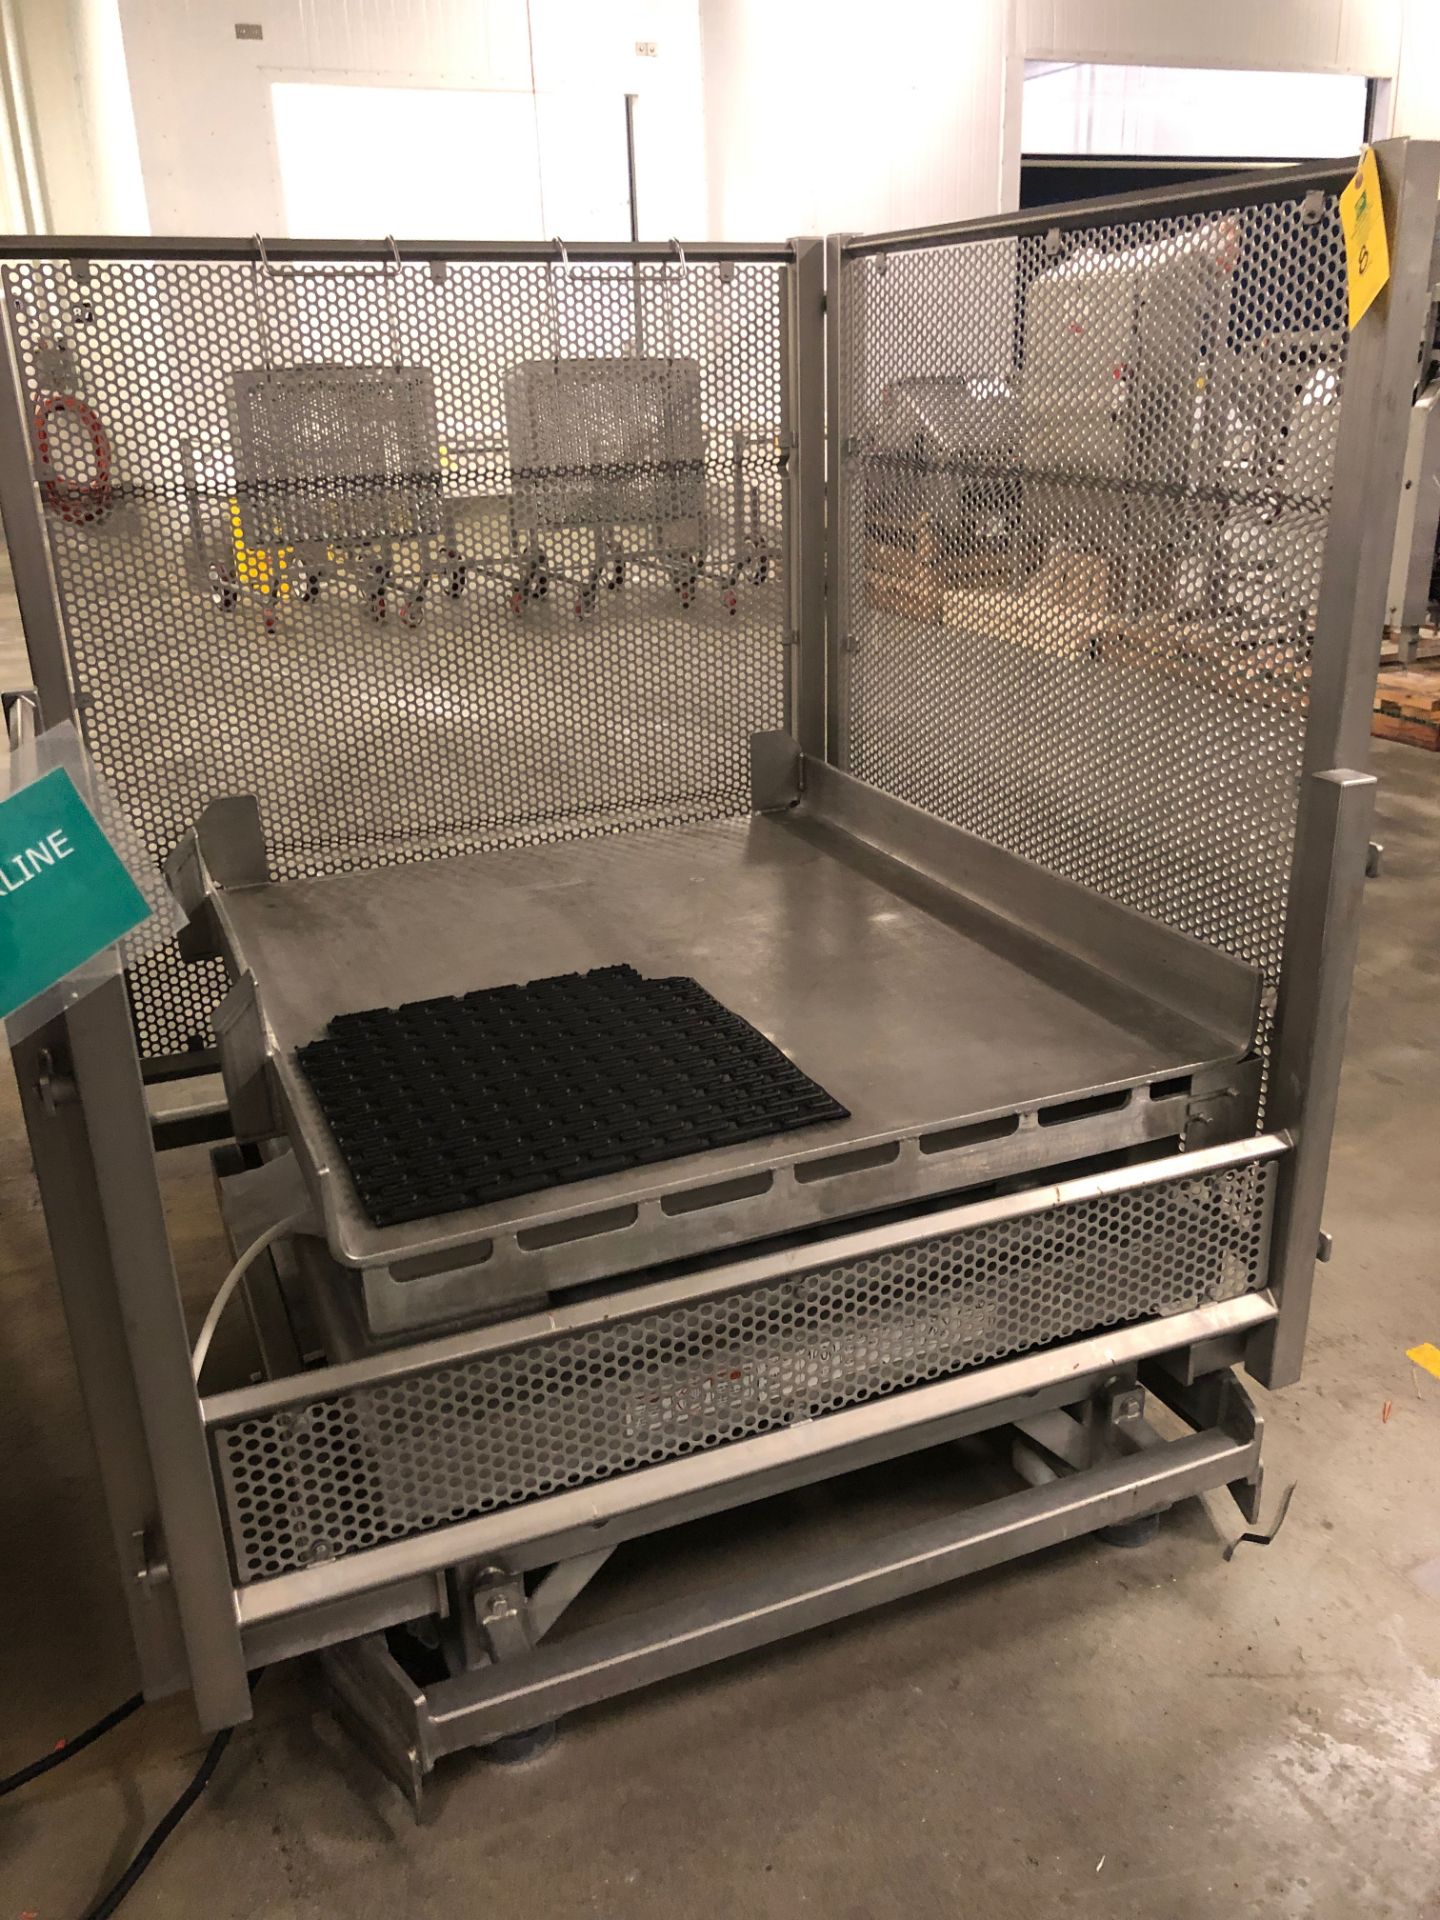 Stainless Steel Pallet Lifter Rated 4000 lbs. Capacity - Image 2 of 4